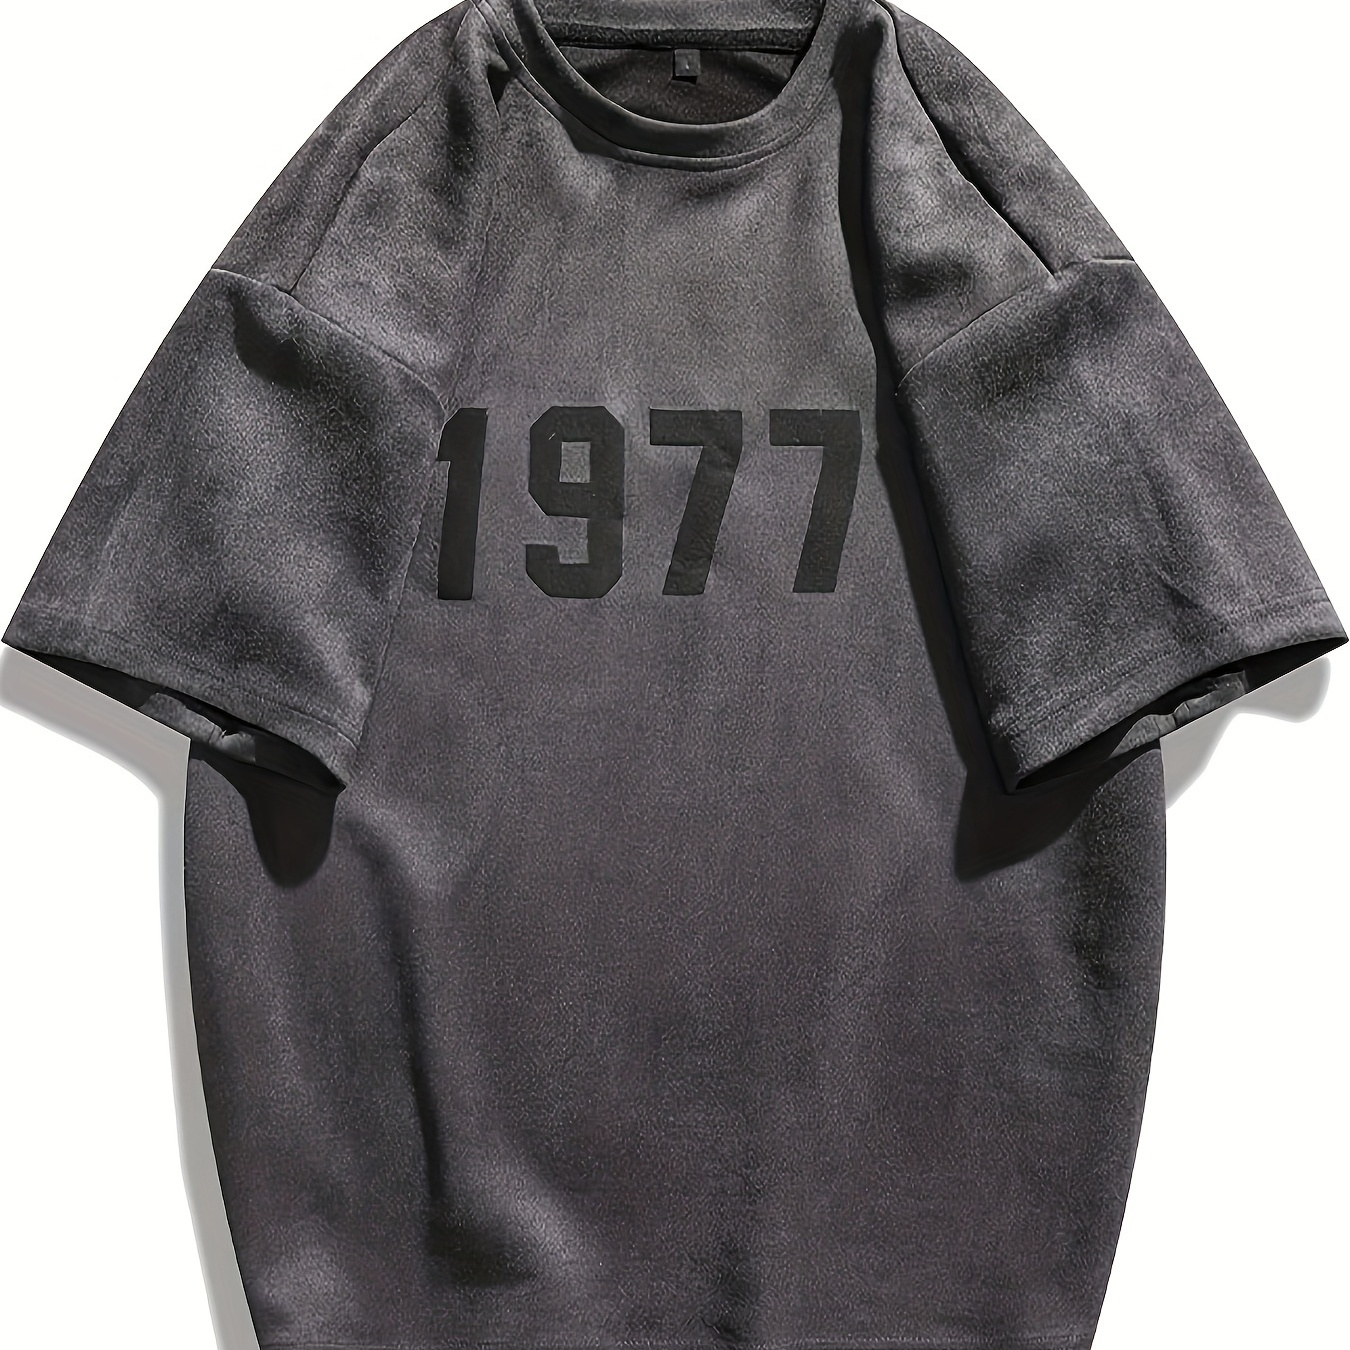 

1977 Graphic Men's Short Sleeve T-shirt, Comfy Stretchy Trendy Tees For Summer, Casual Daily Style Fashion Clothing